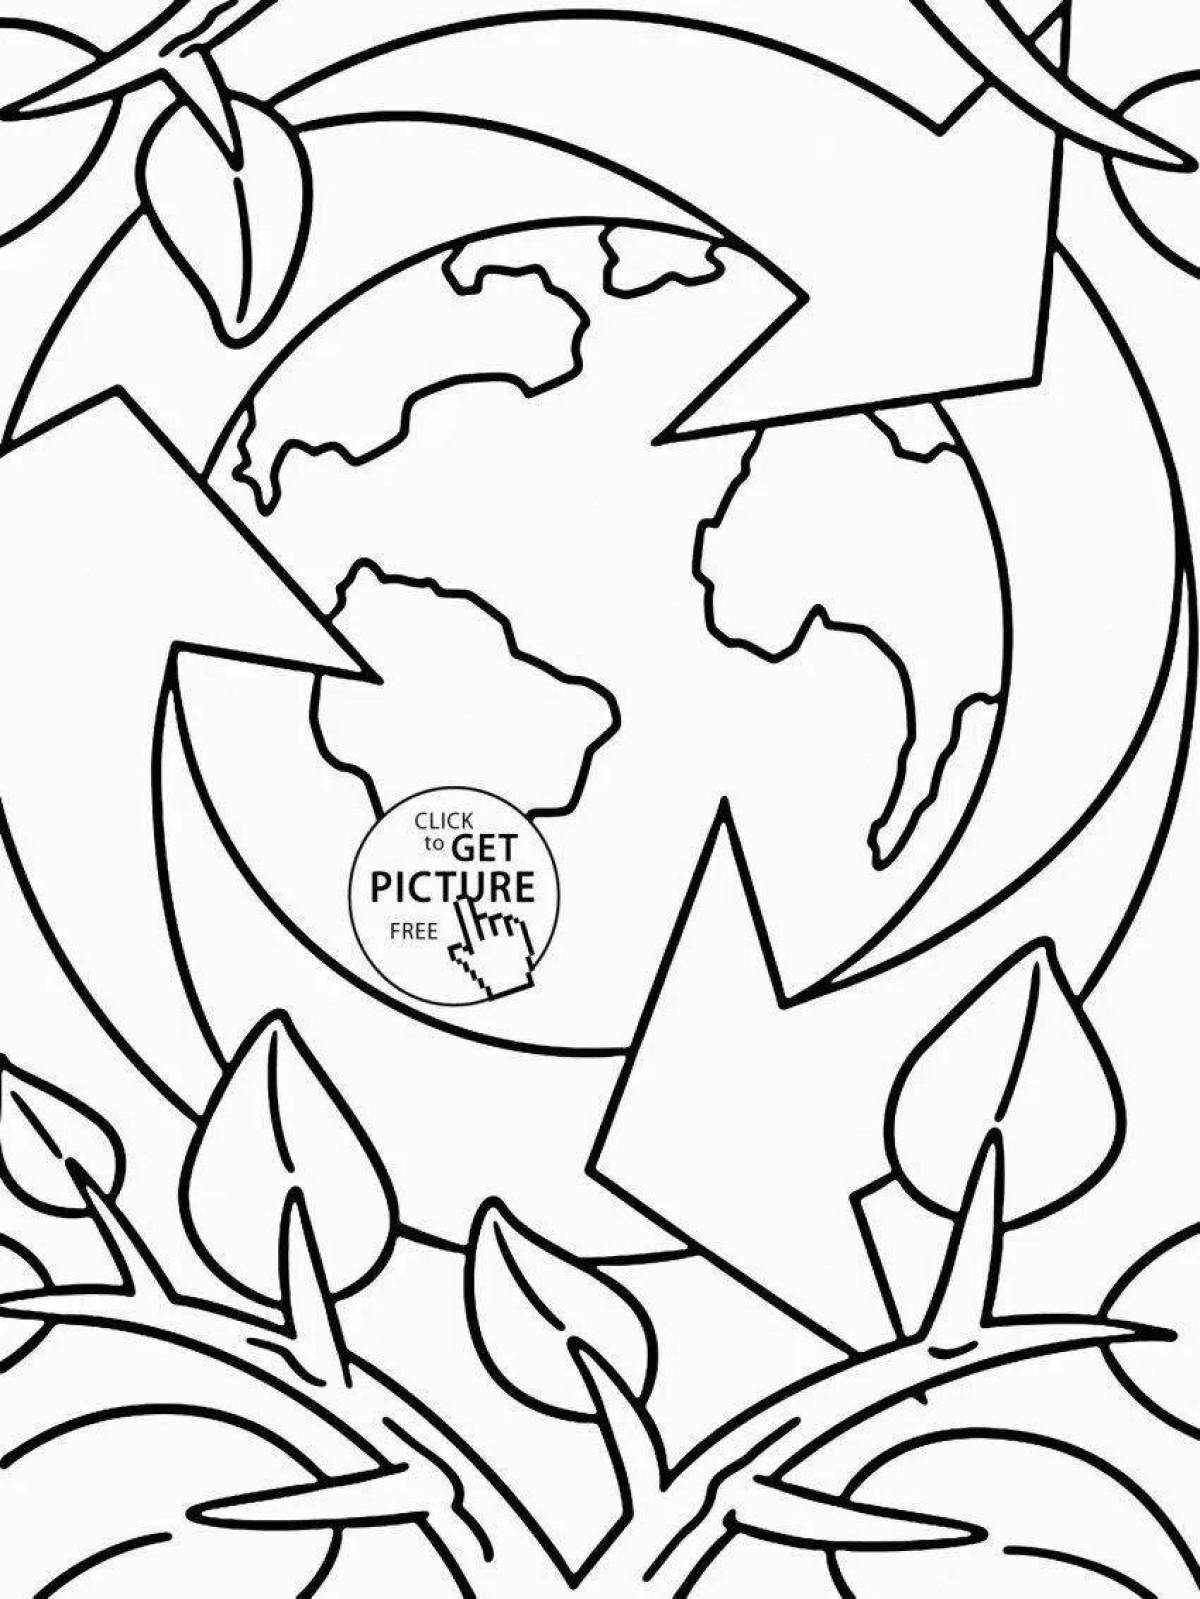 Playful environmental coloring book for elementary grades